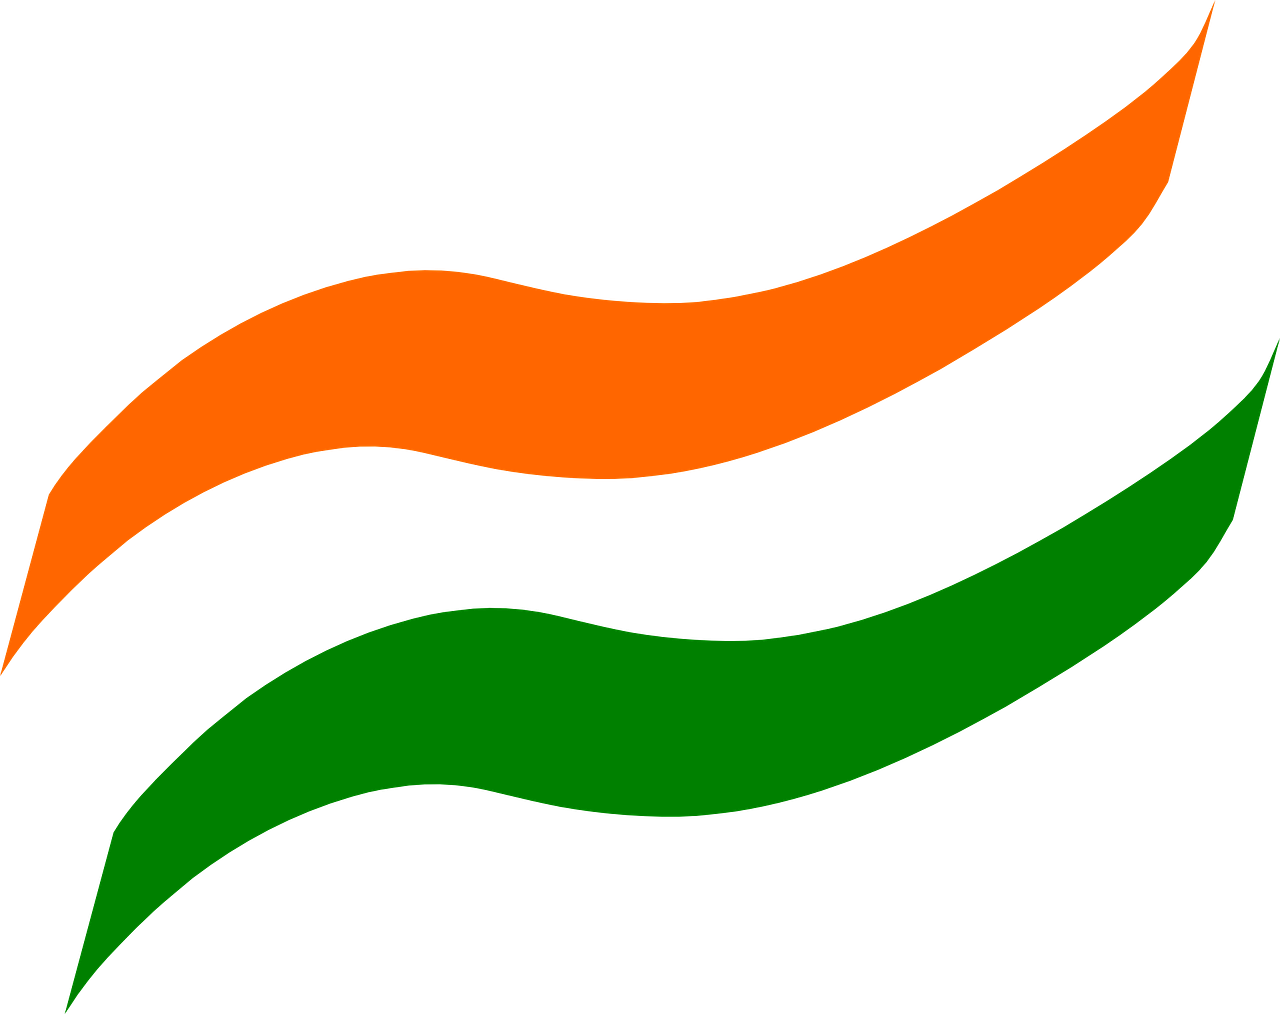 The flag of three of these countries is a green, white and orange tricolour or triband. Which one is NOT? 